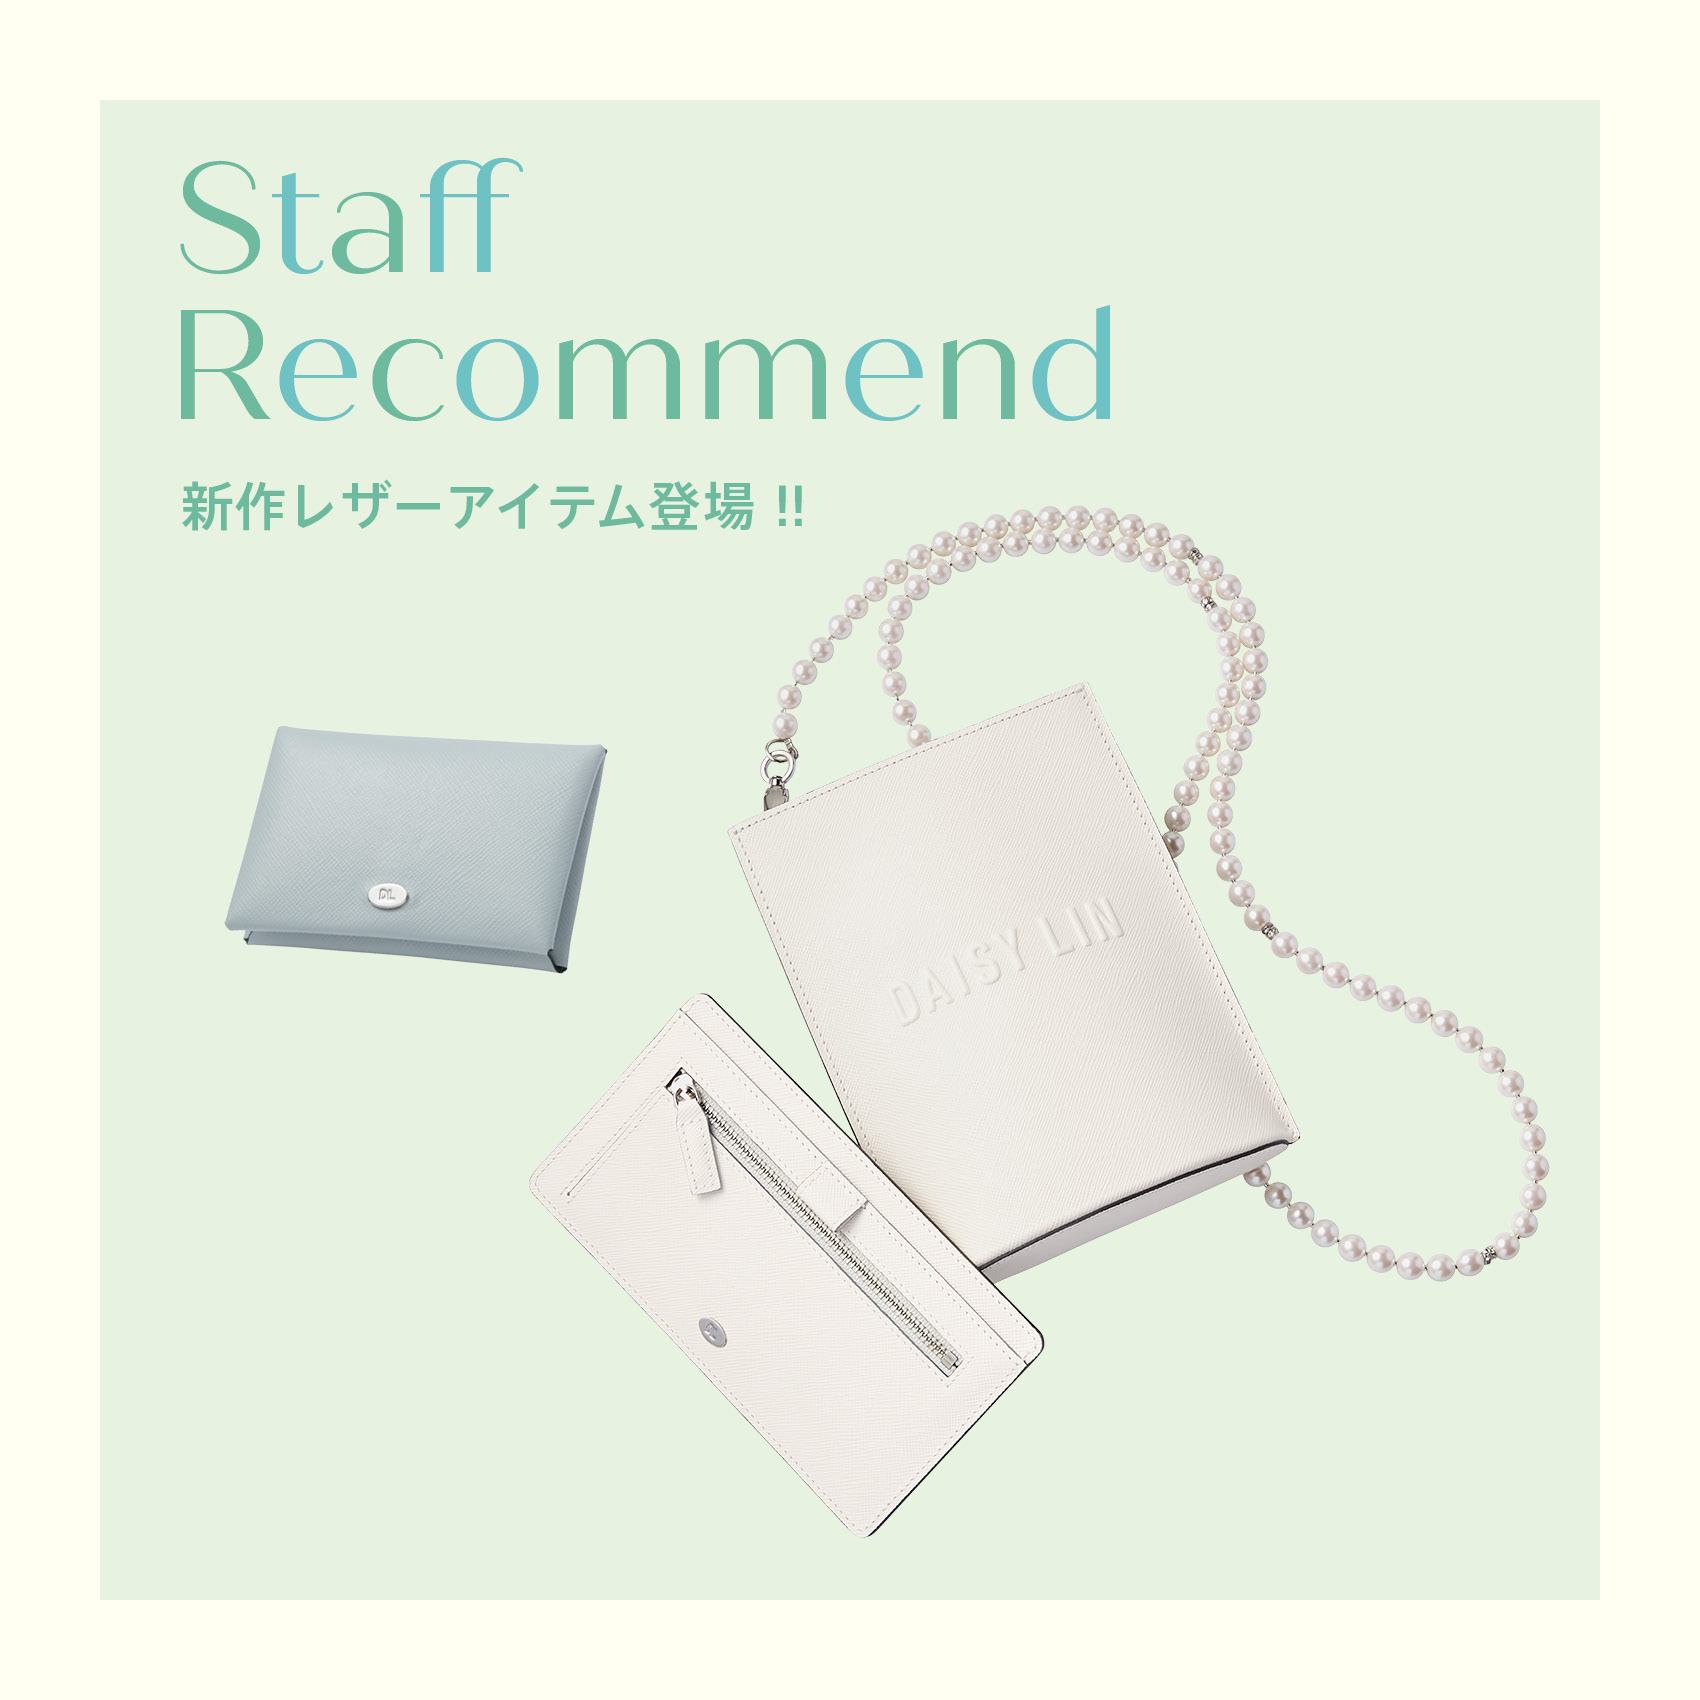 Staff Recommend"新作レザーアイテム登場！"